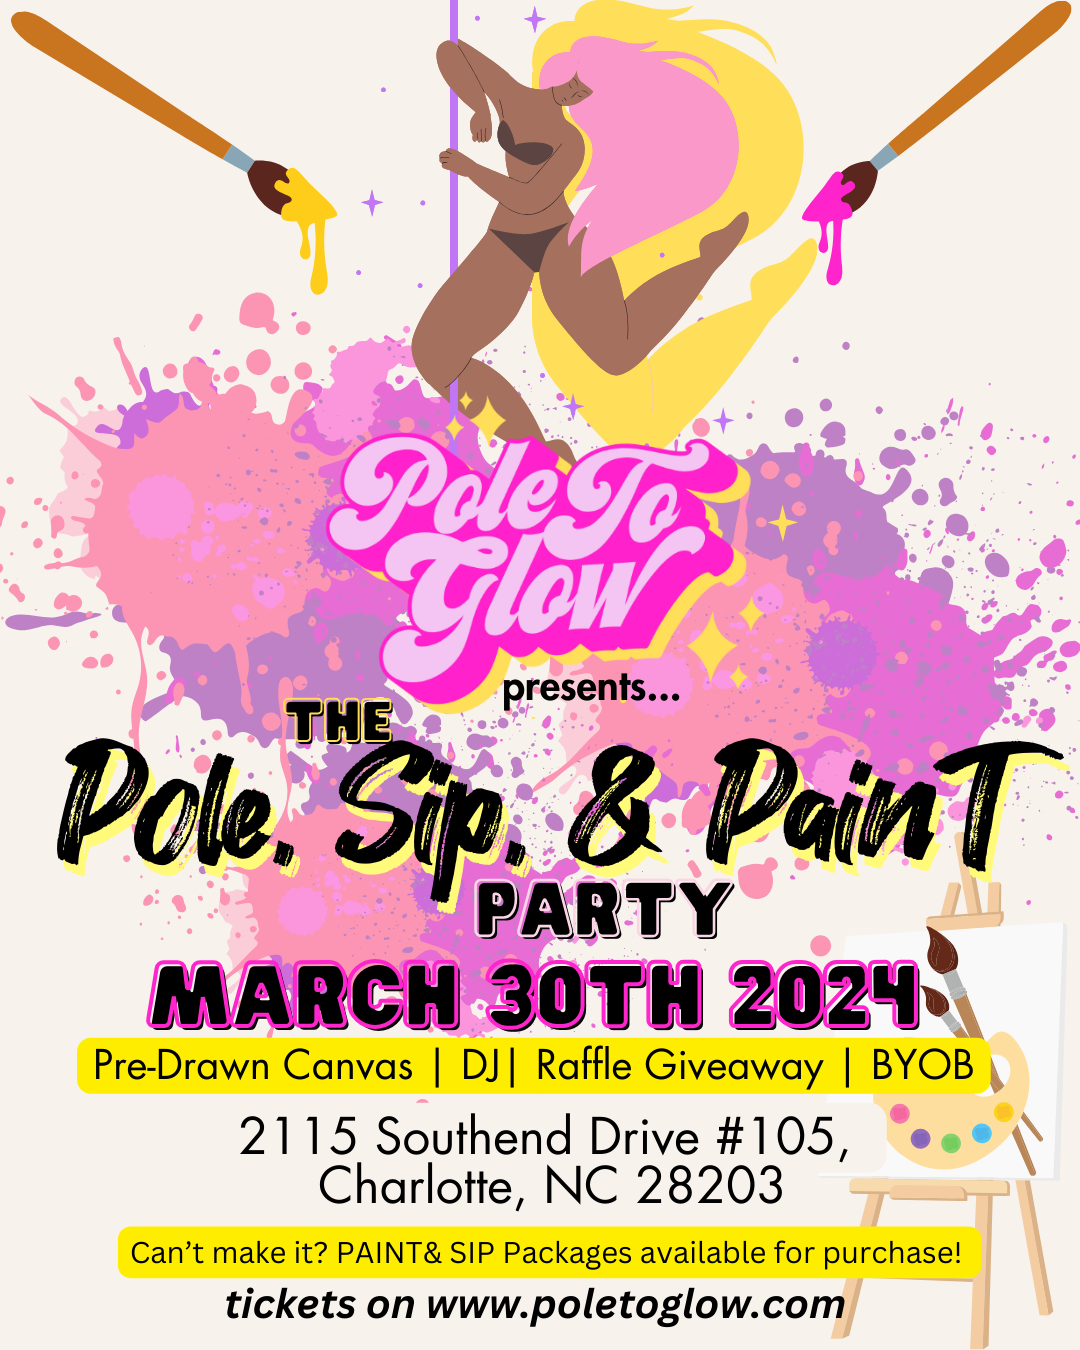 Pole, Sip & Paint Party (GENERAL ADMISSION) - CHARLOTTE, NC